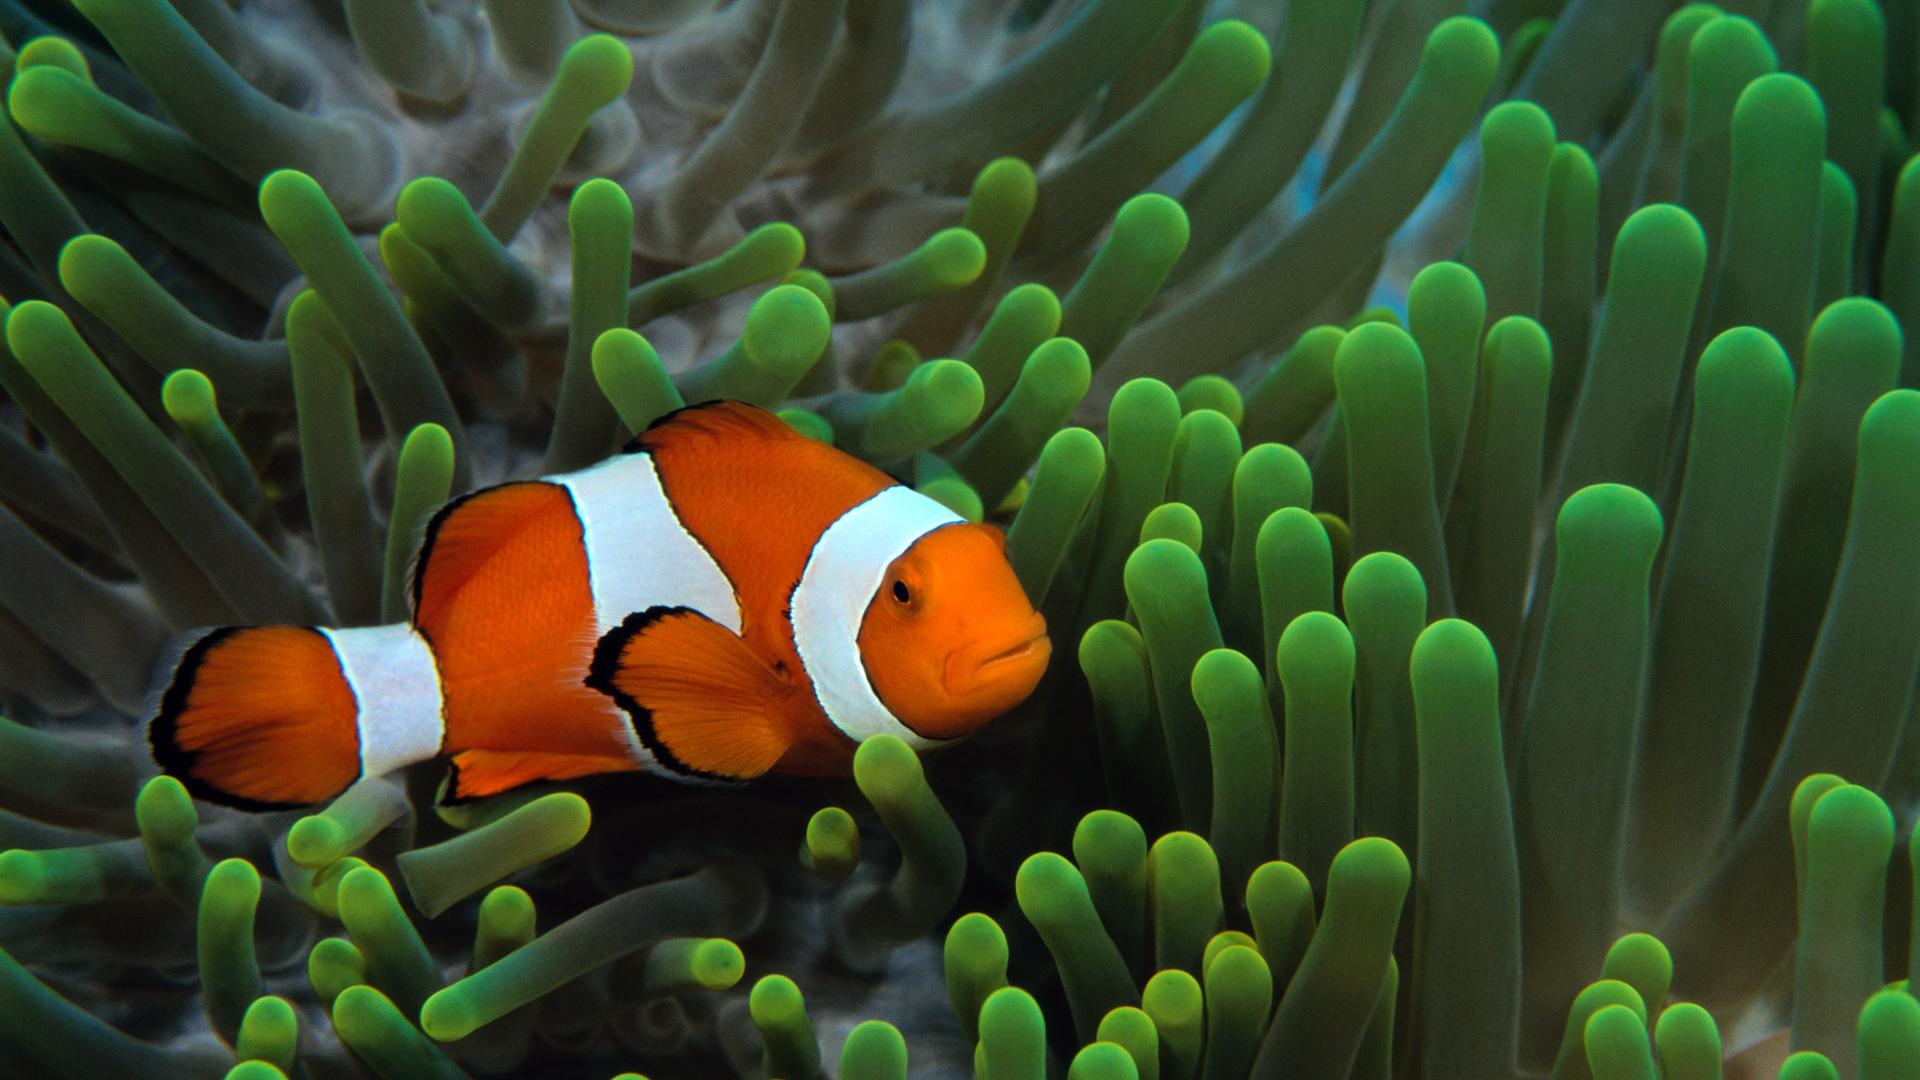 Finding Nemo Backgrounds 59 images